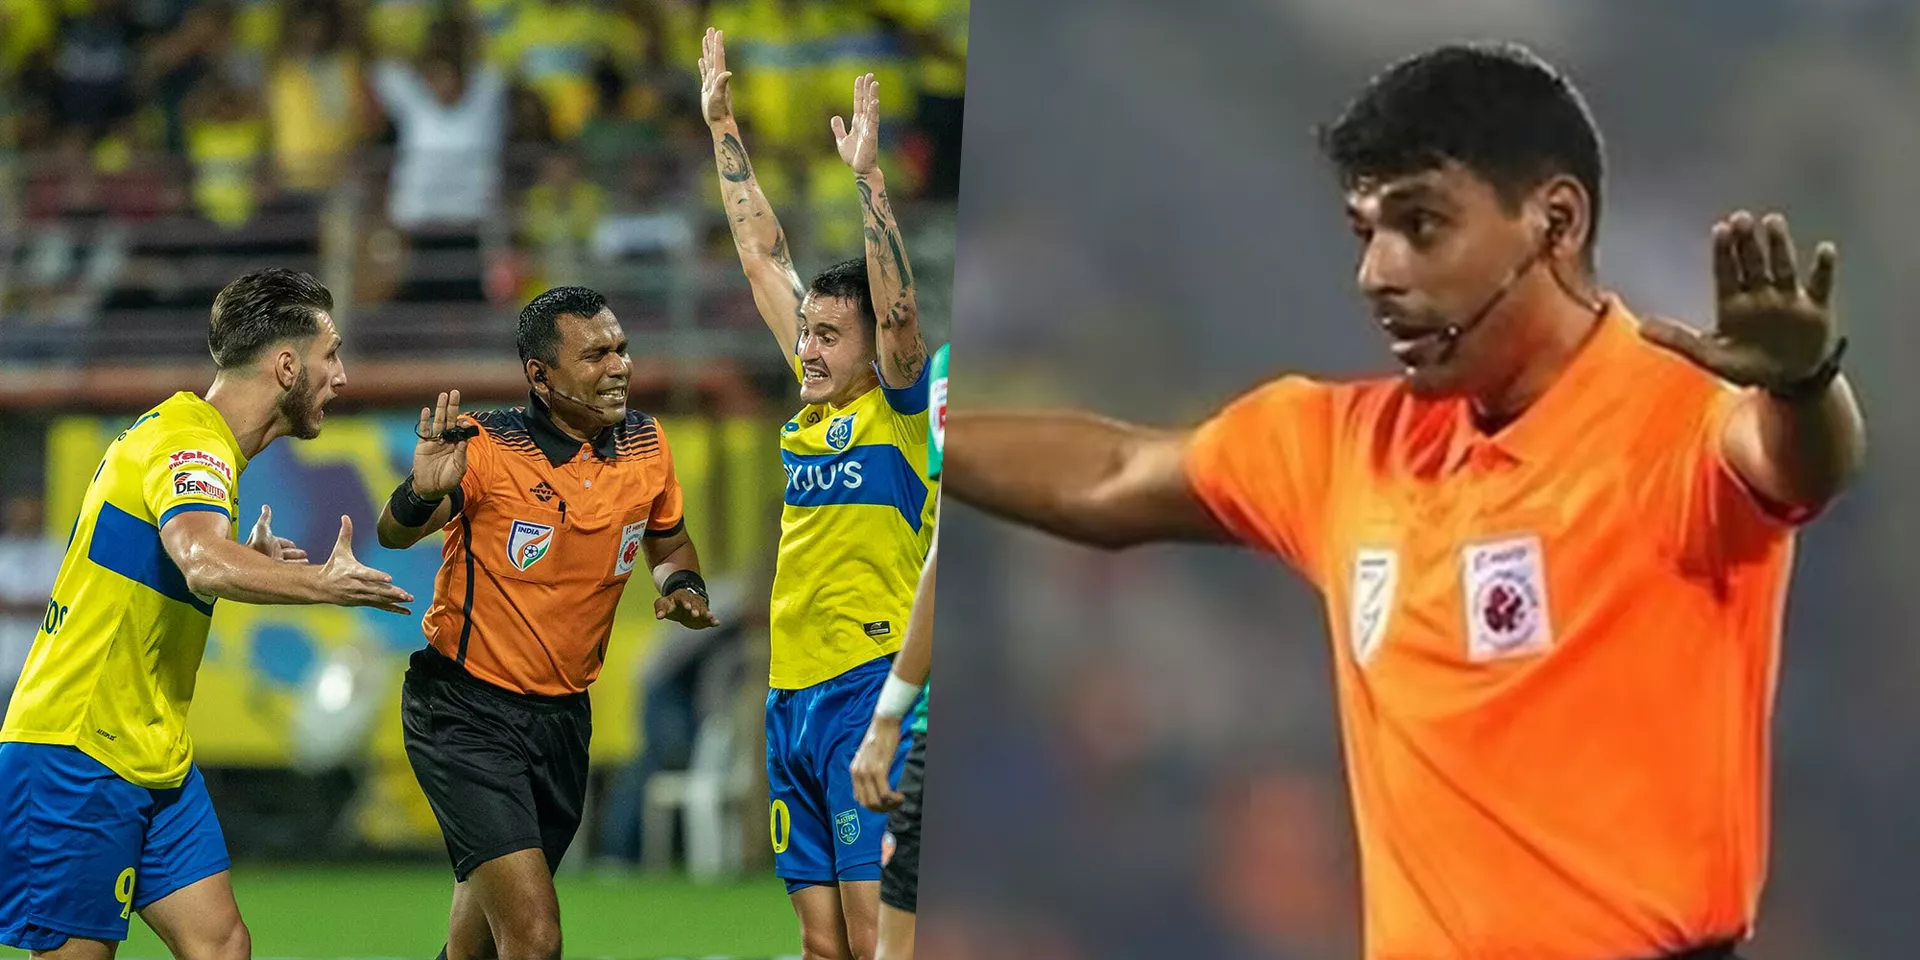 INDIAN FOOTBALL BEST REFEREES